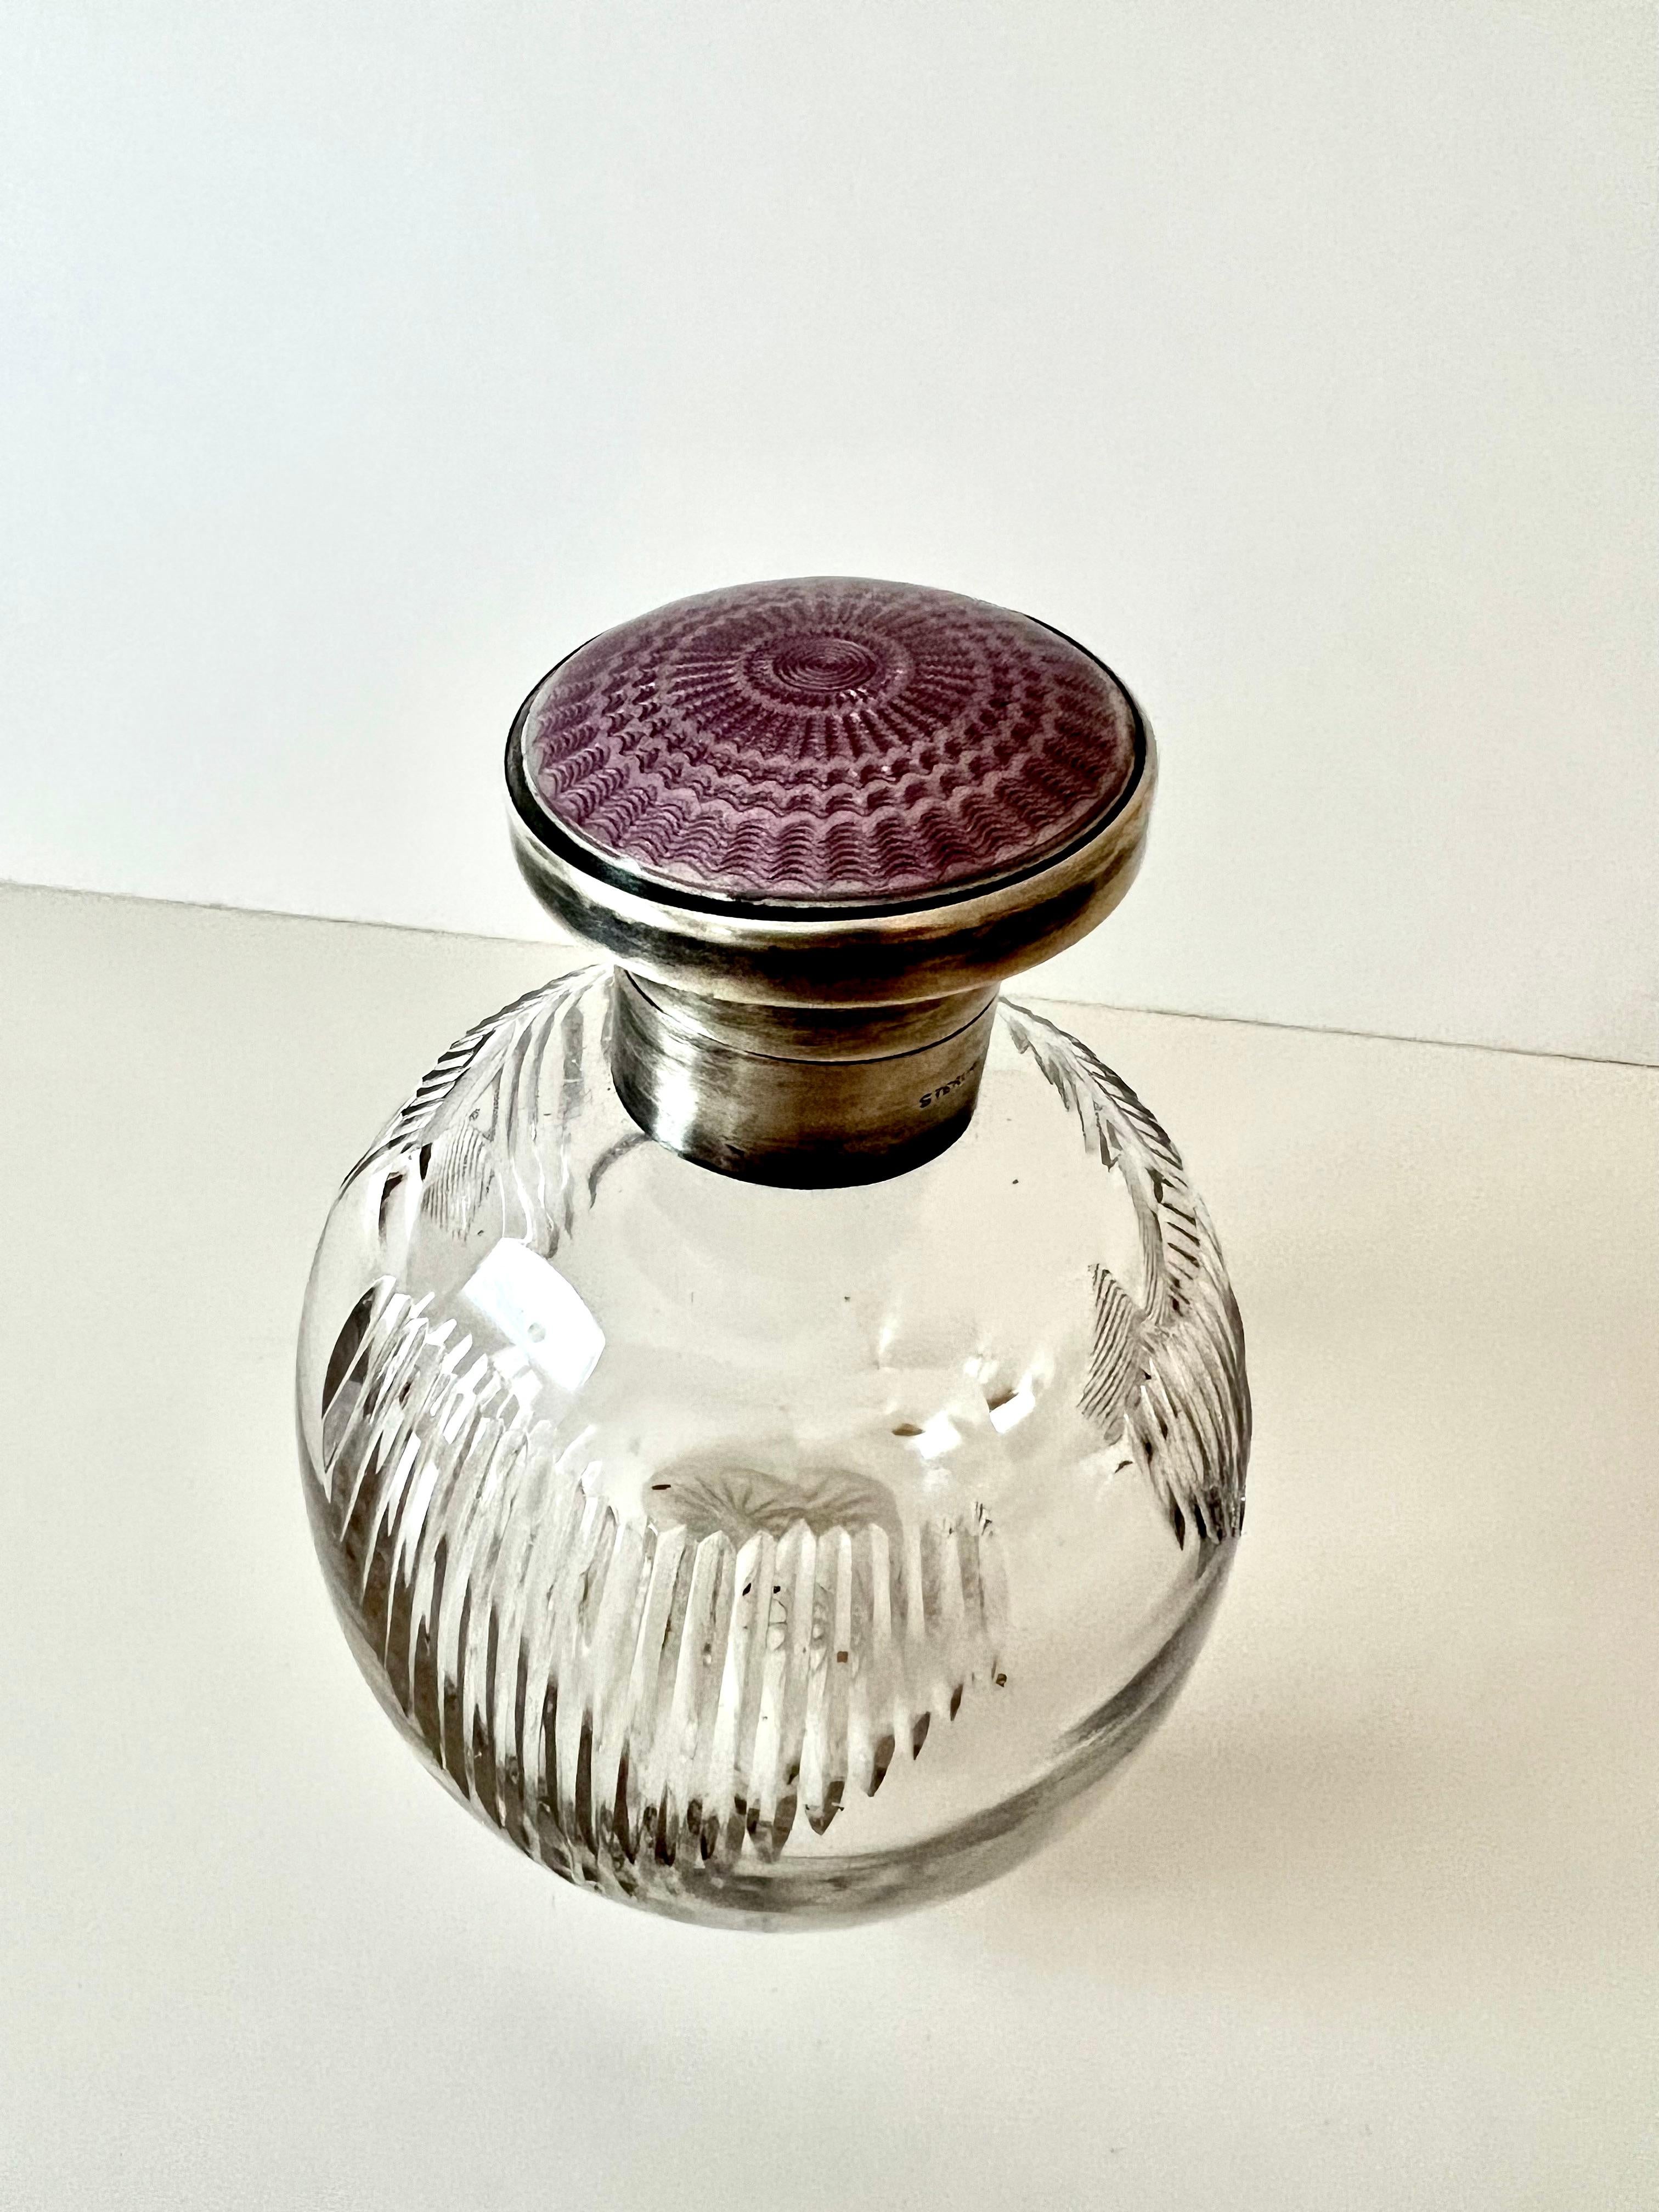 A beautiful perfume bottle with sterling closure and Lavender Enamel Guilloché. A compliment to any dressing table, dressing room, vanity or near the tub... a gorgeous clear glass piece with no staining. The enamel Guilloché is stunning.